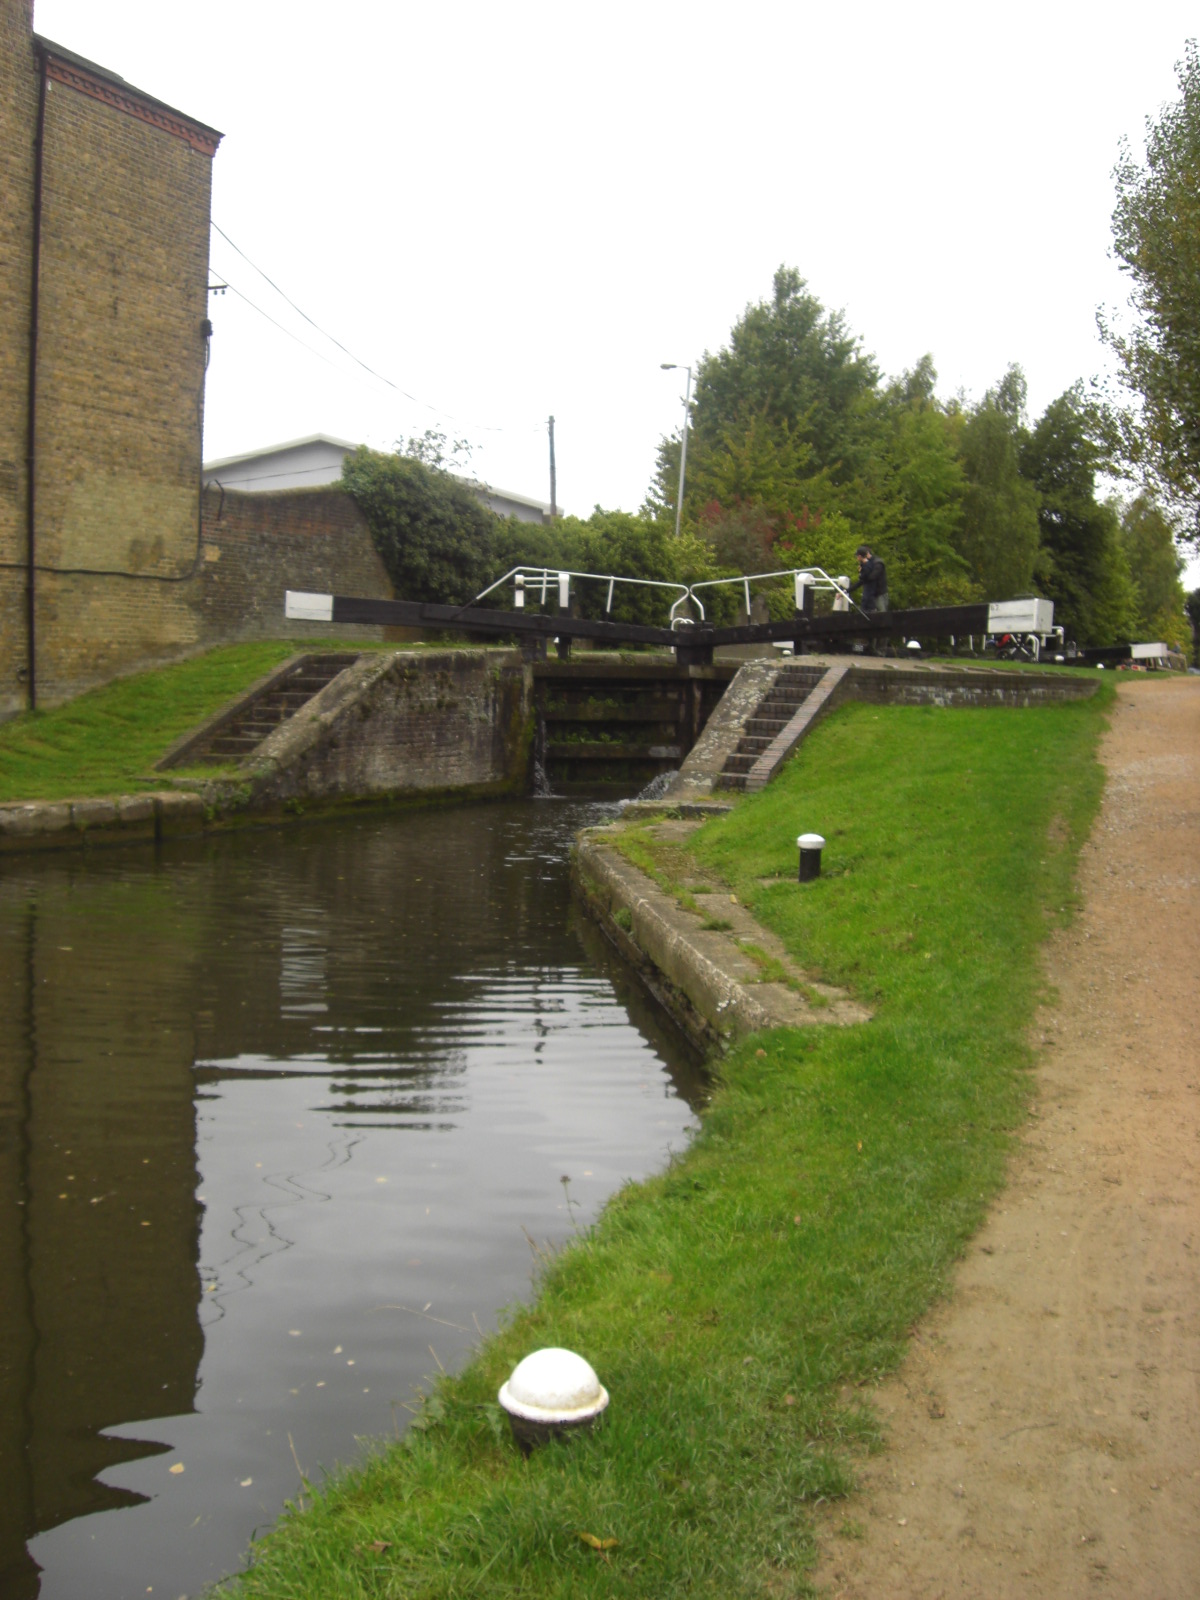 ... The Paper Mill (Apsley) to The Fishery Inn (Hemel Hempstead) and back